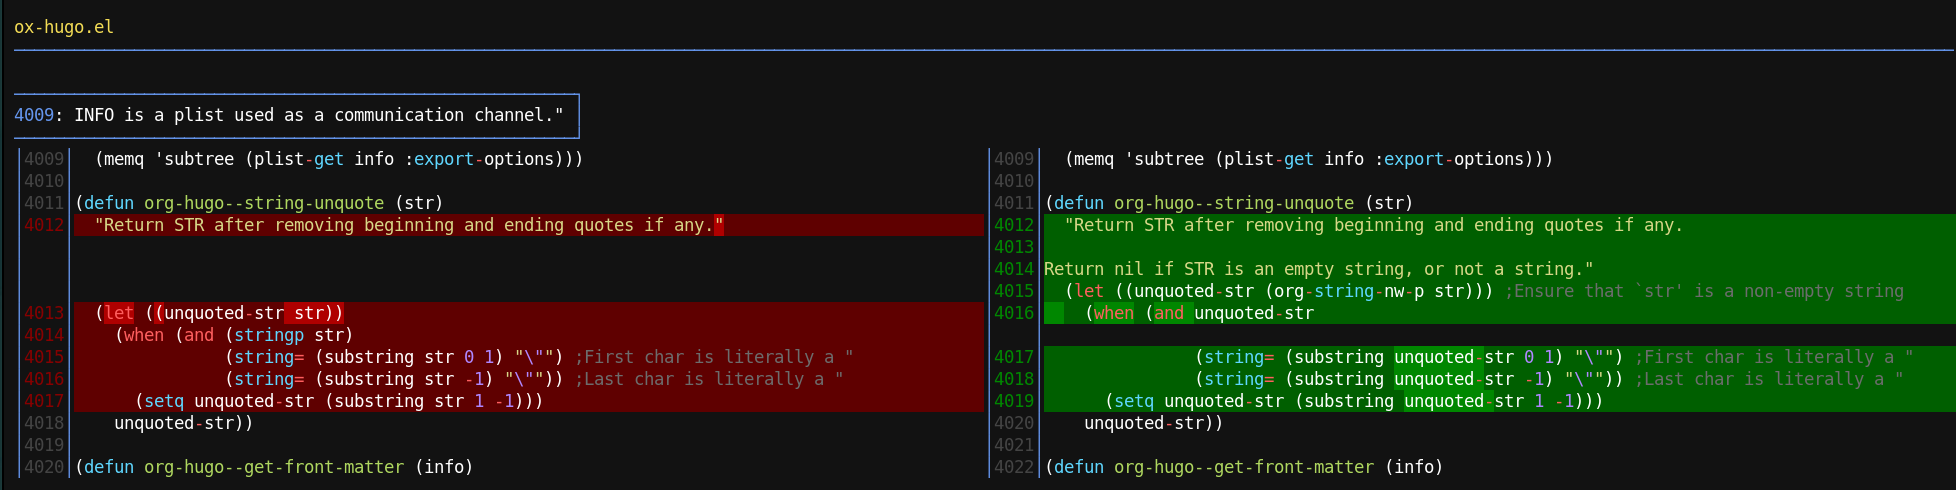 Figure 1: Example of how delta renders a git diff for an ox-hugo commit